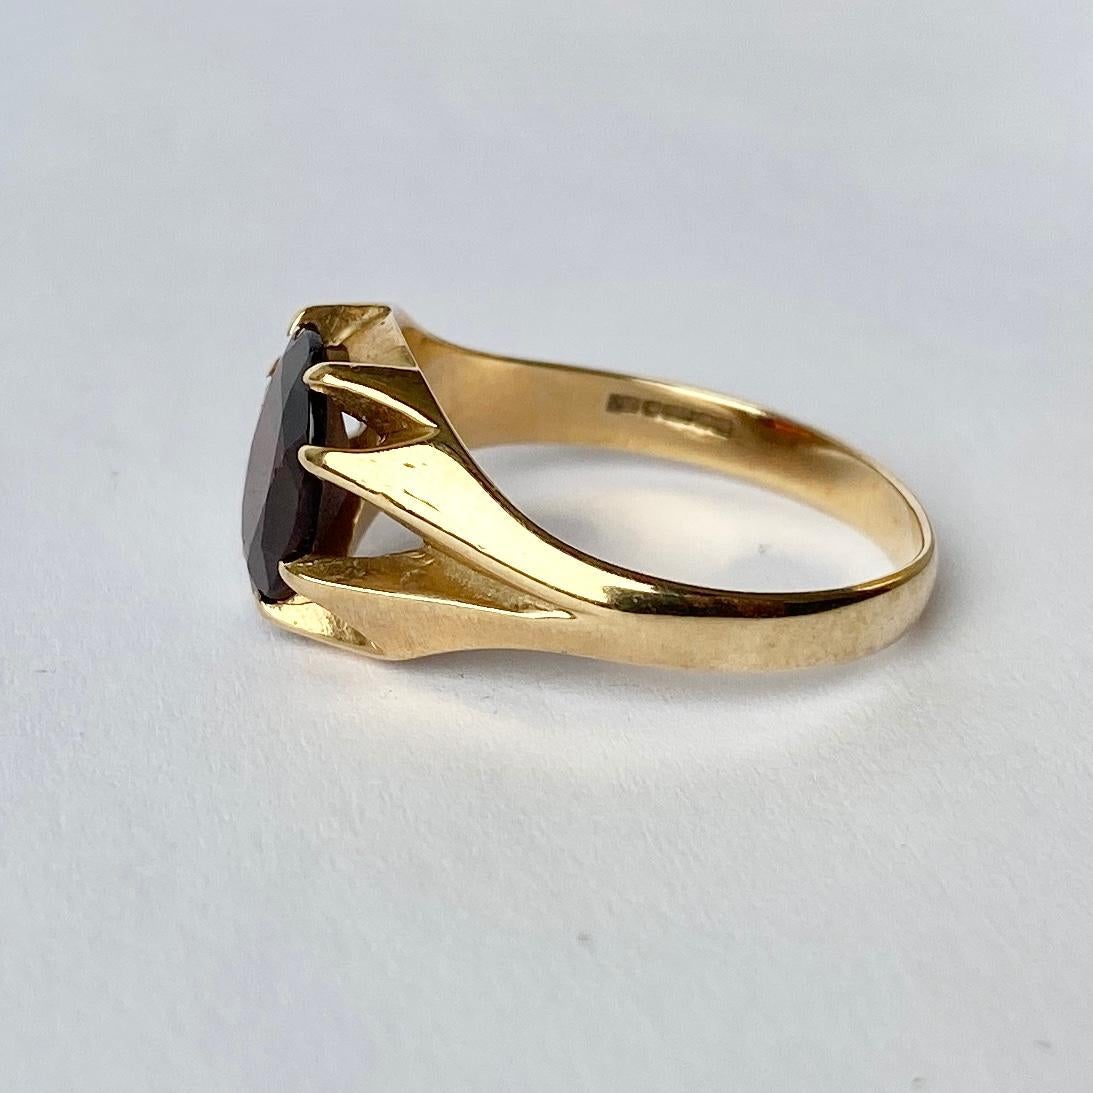 This simple style signet ring holds a garnet stone measuring approx 2carat.  Made in Birmingham, England. 

Ring Size: S or 9
Band Widest Point: 11mm

Weight: 3.3g